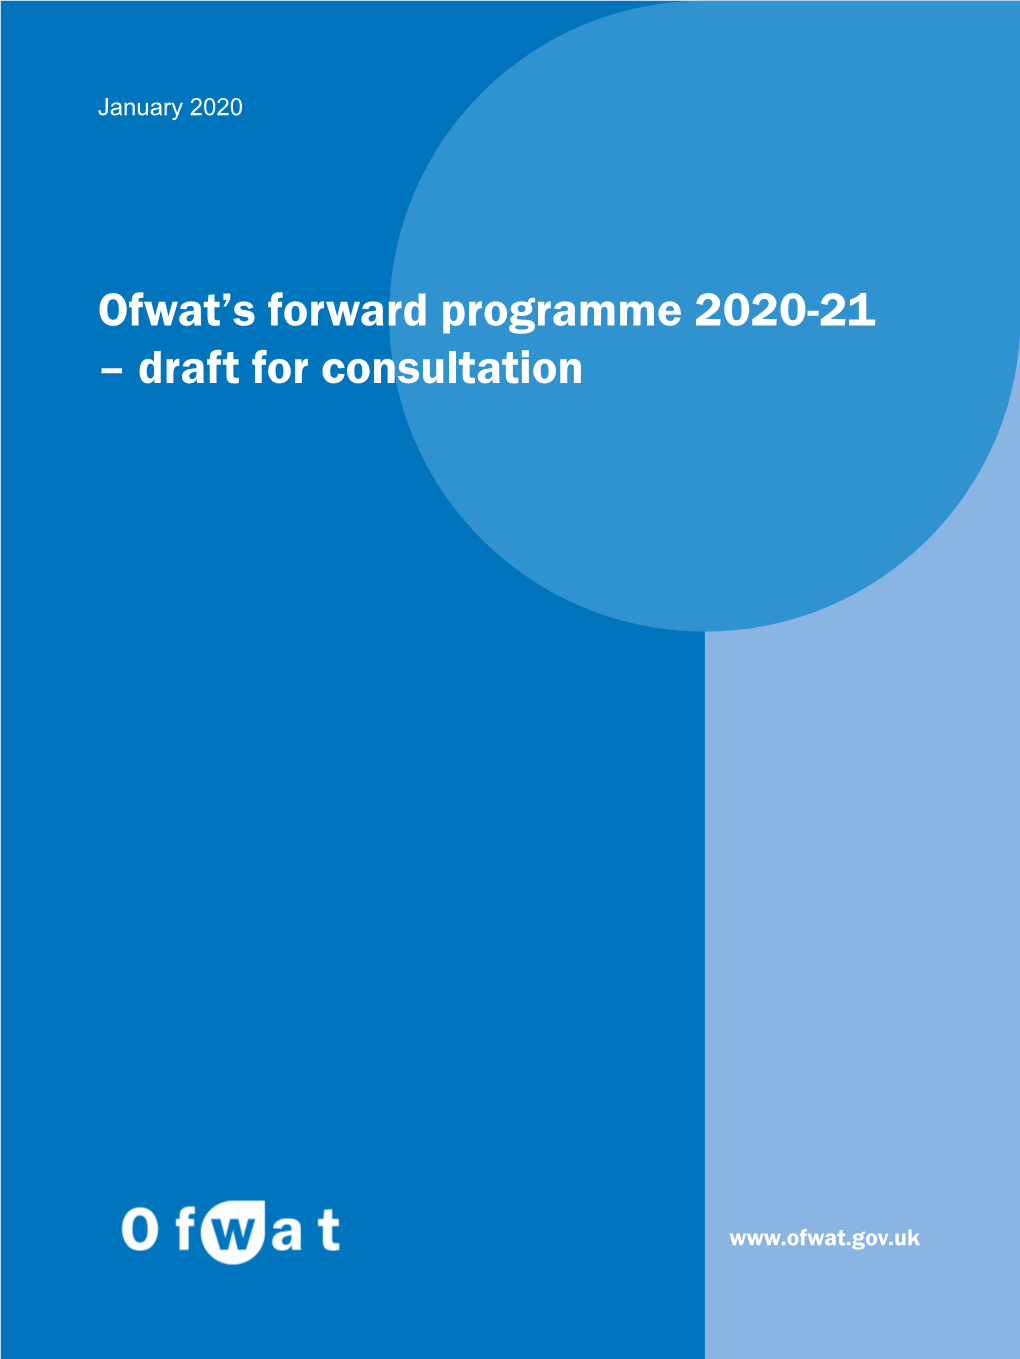 Ofwat's Forward Programme 2020-21 – Draft for Consultation